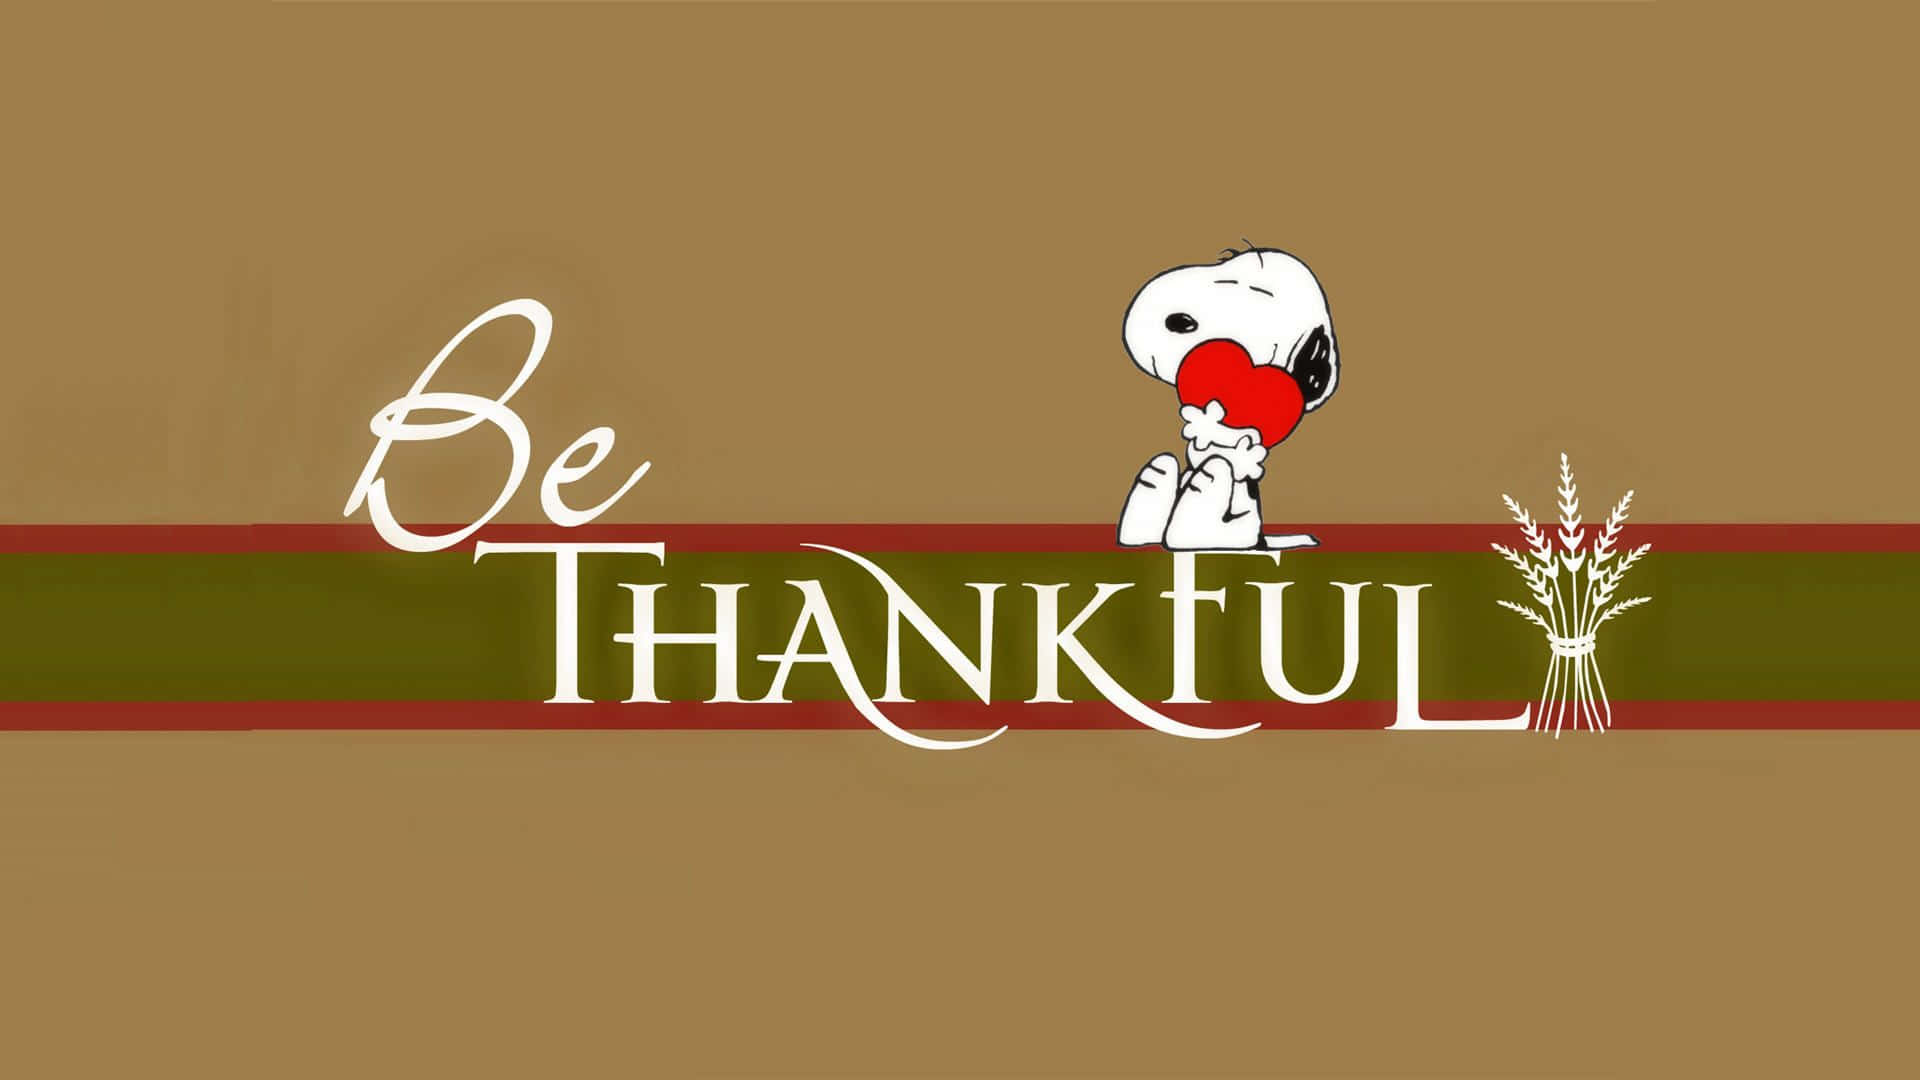 Snoopy Celebrates Thanksgiving With Charlie Brown